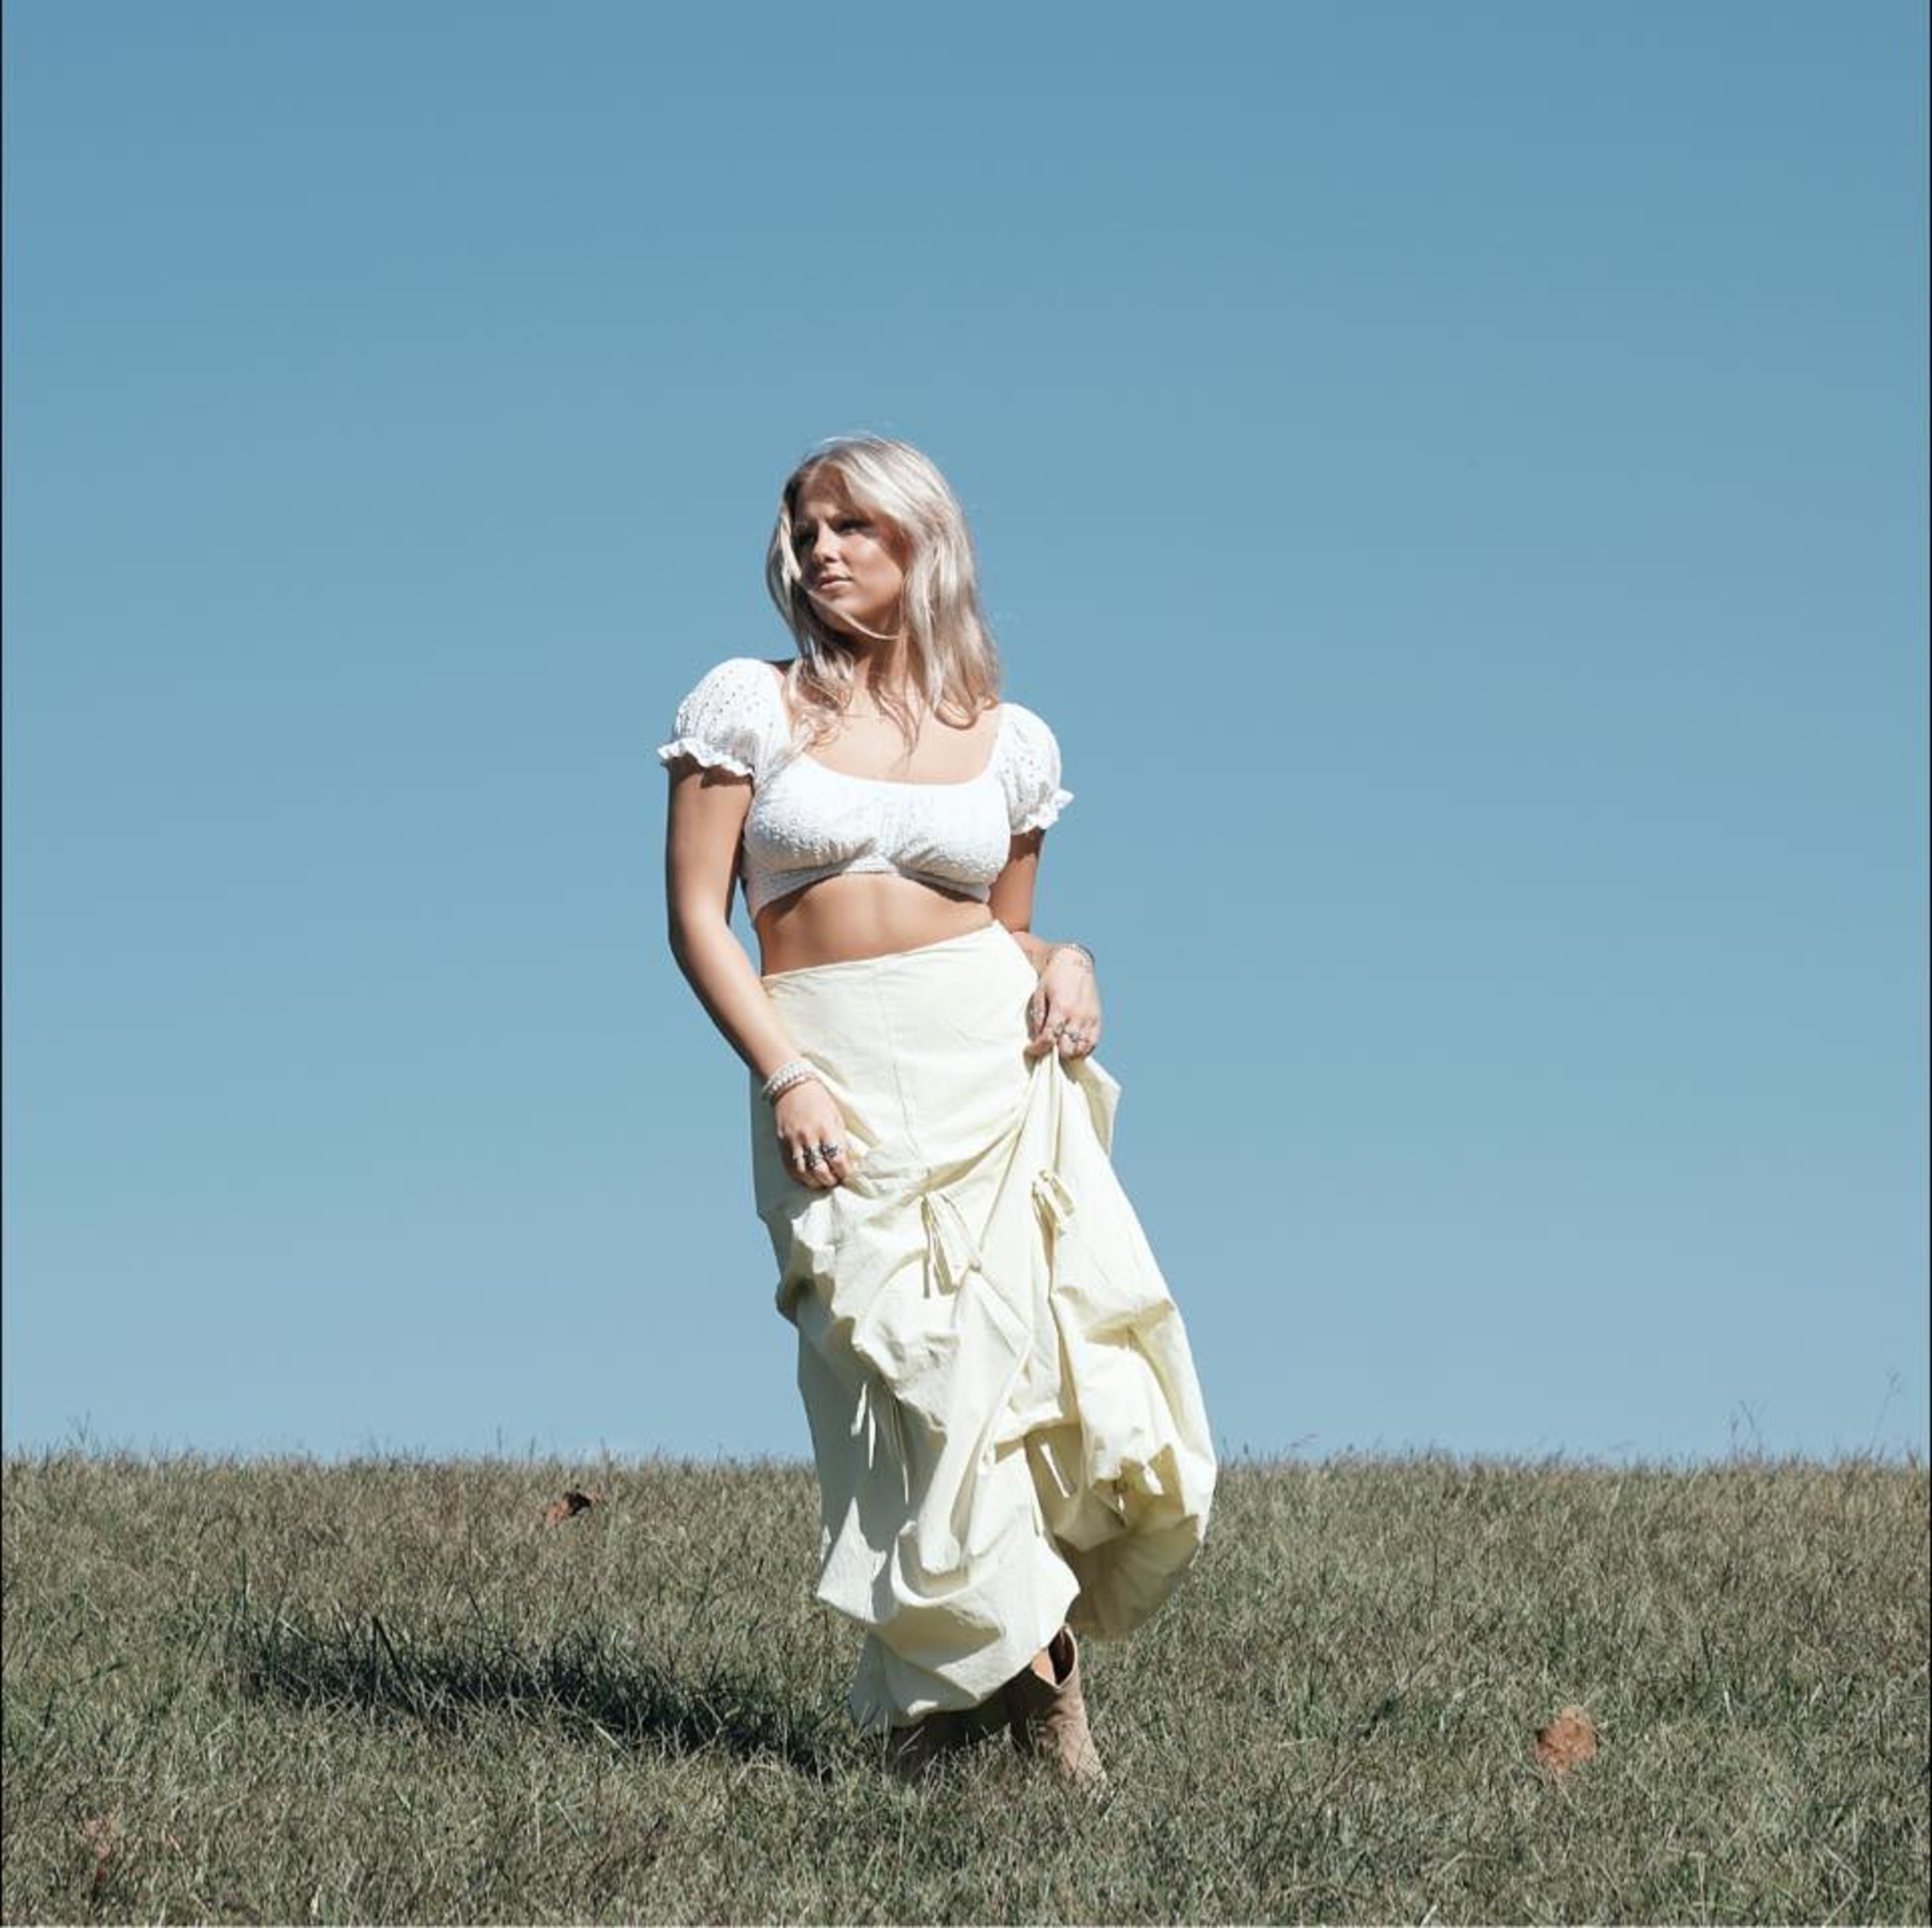 <p>At just 19 years old, singer-songwriter Ashley Anne writes heartfelt, emotion-drenched lyrics that are wise beyond her years. Just listen to "Dear Dolly," a tune addressed to the legend Dolly Parton herself, as proof. </p><p>You may also like: <a href='https://www.yardbarker.com/entertainment/articles/2000s_movies_that_are_so_bad_theyre_good_022824/s1__39784595'>2000s movies that are so bad they’re good</a></p>